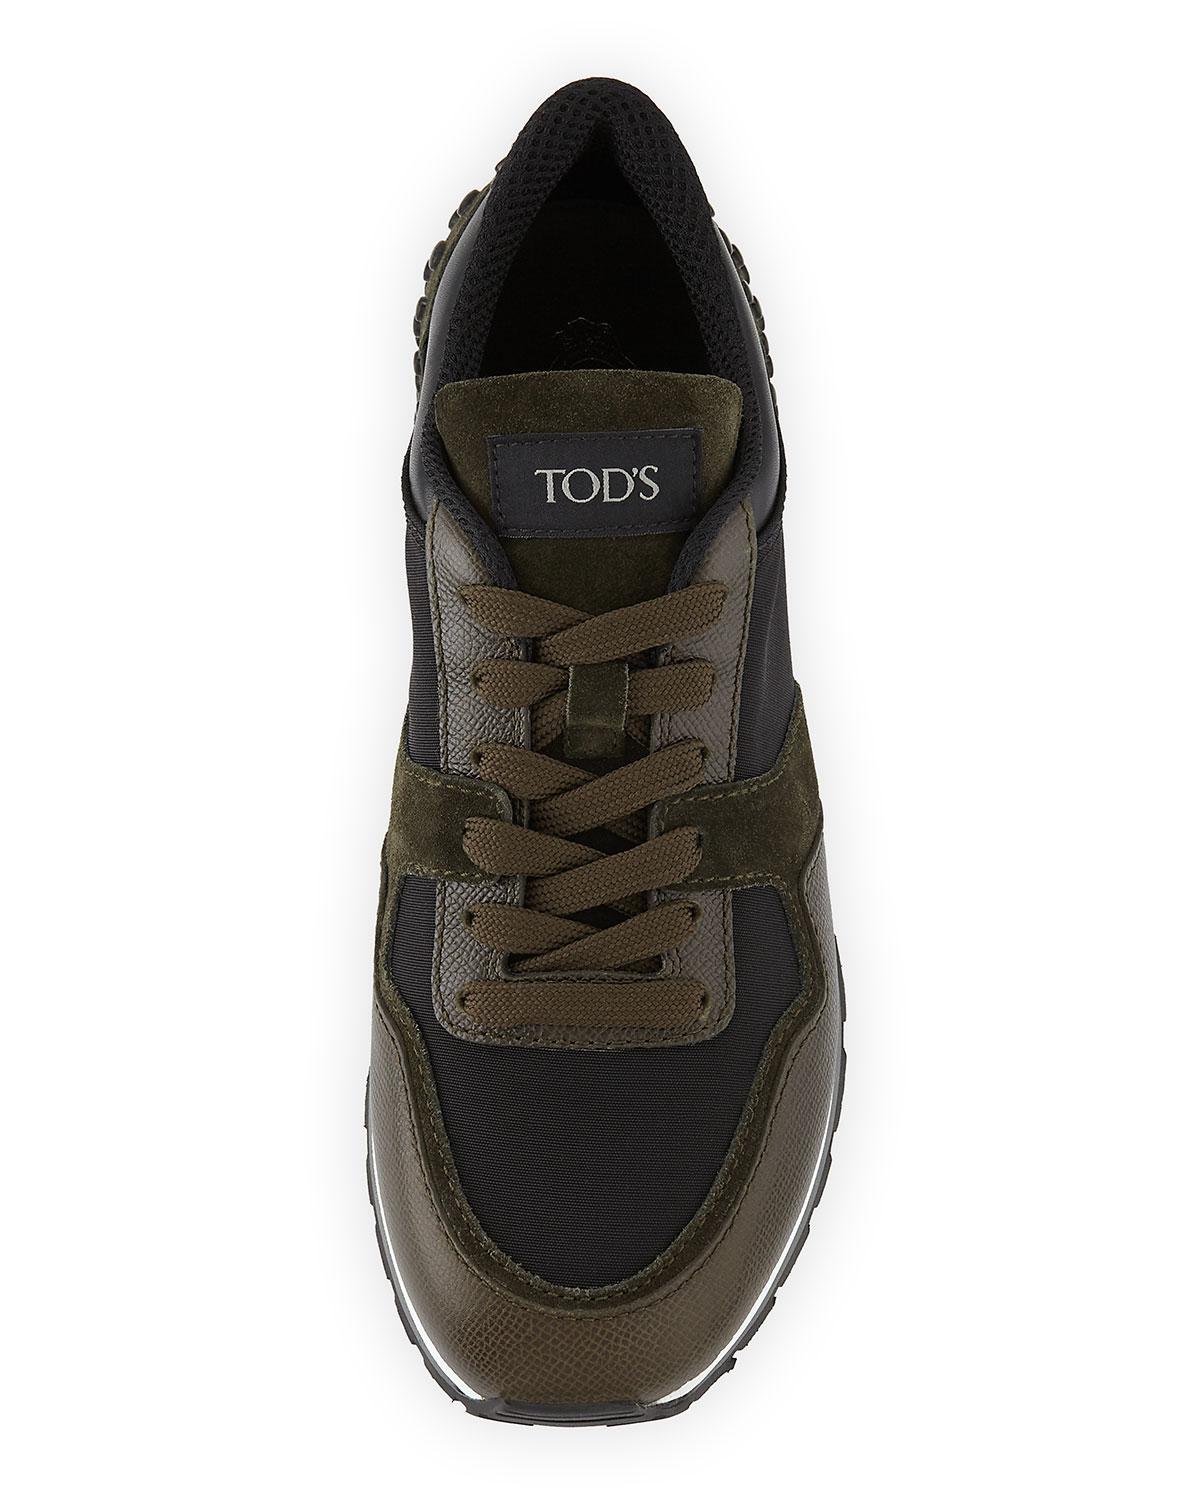 mens tods trainers